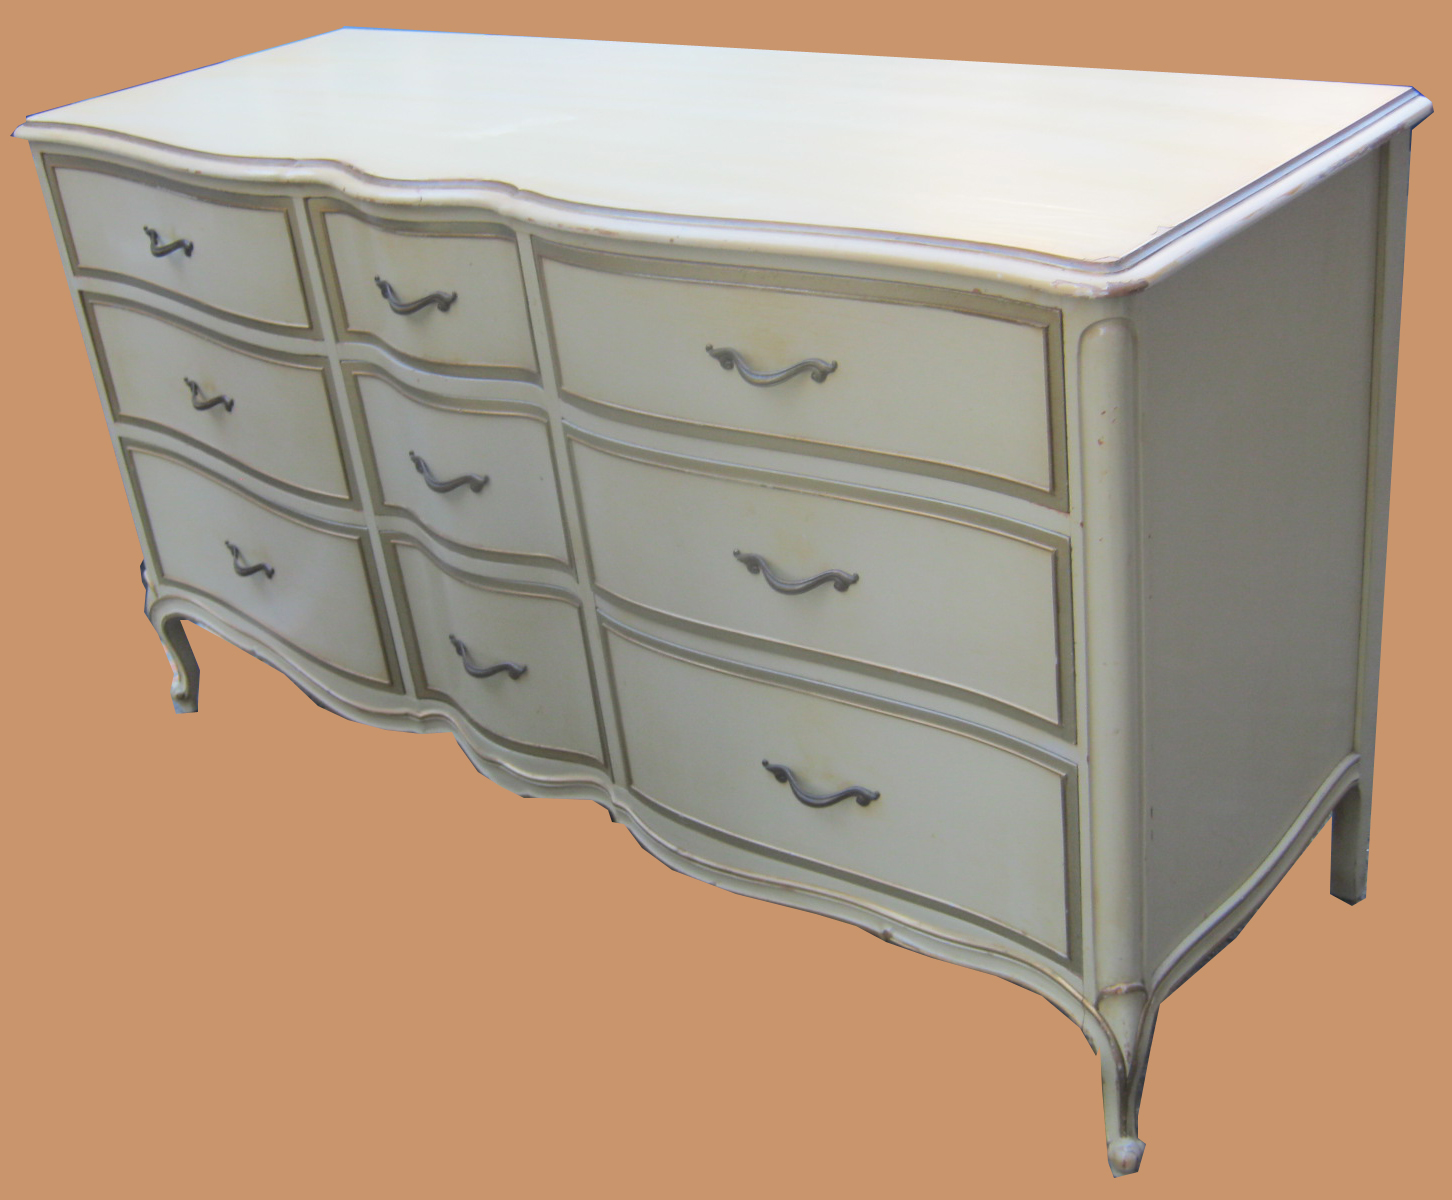 Uhuru Furniture & Collectibles: French Provincial Bedroom Set- SOLD